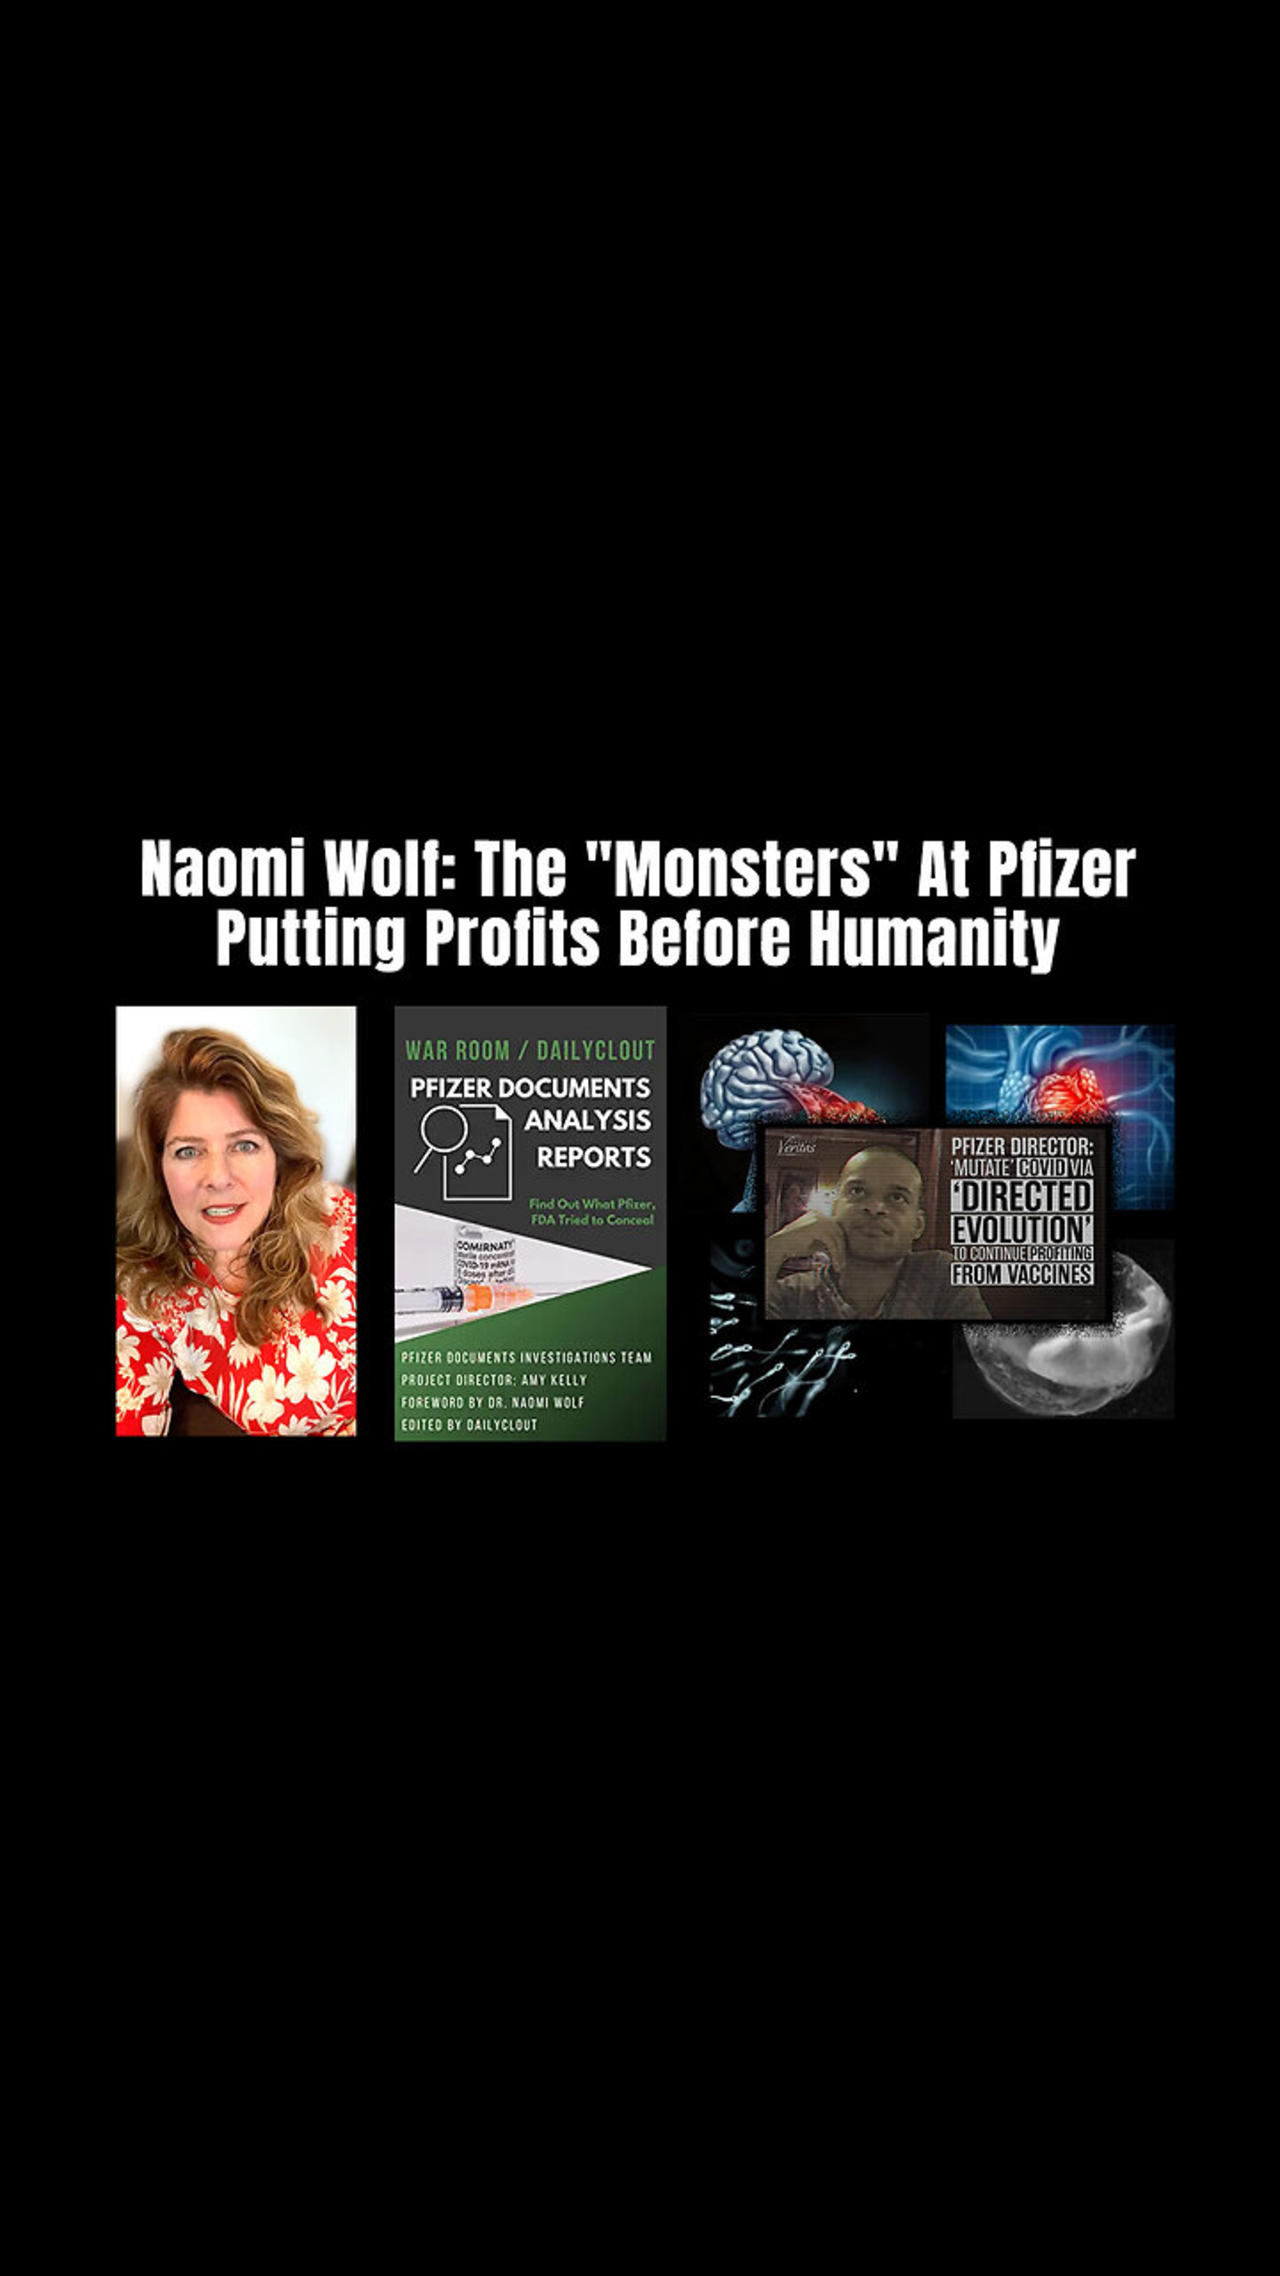 Naomi Wolf: The "Monsters" At Pfizer Putting Profits Before Humanity